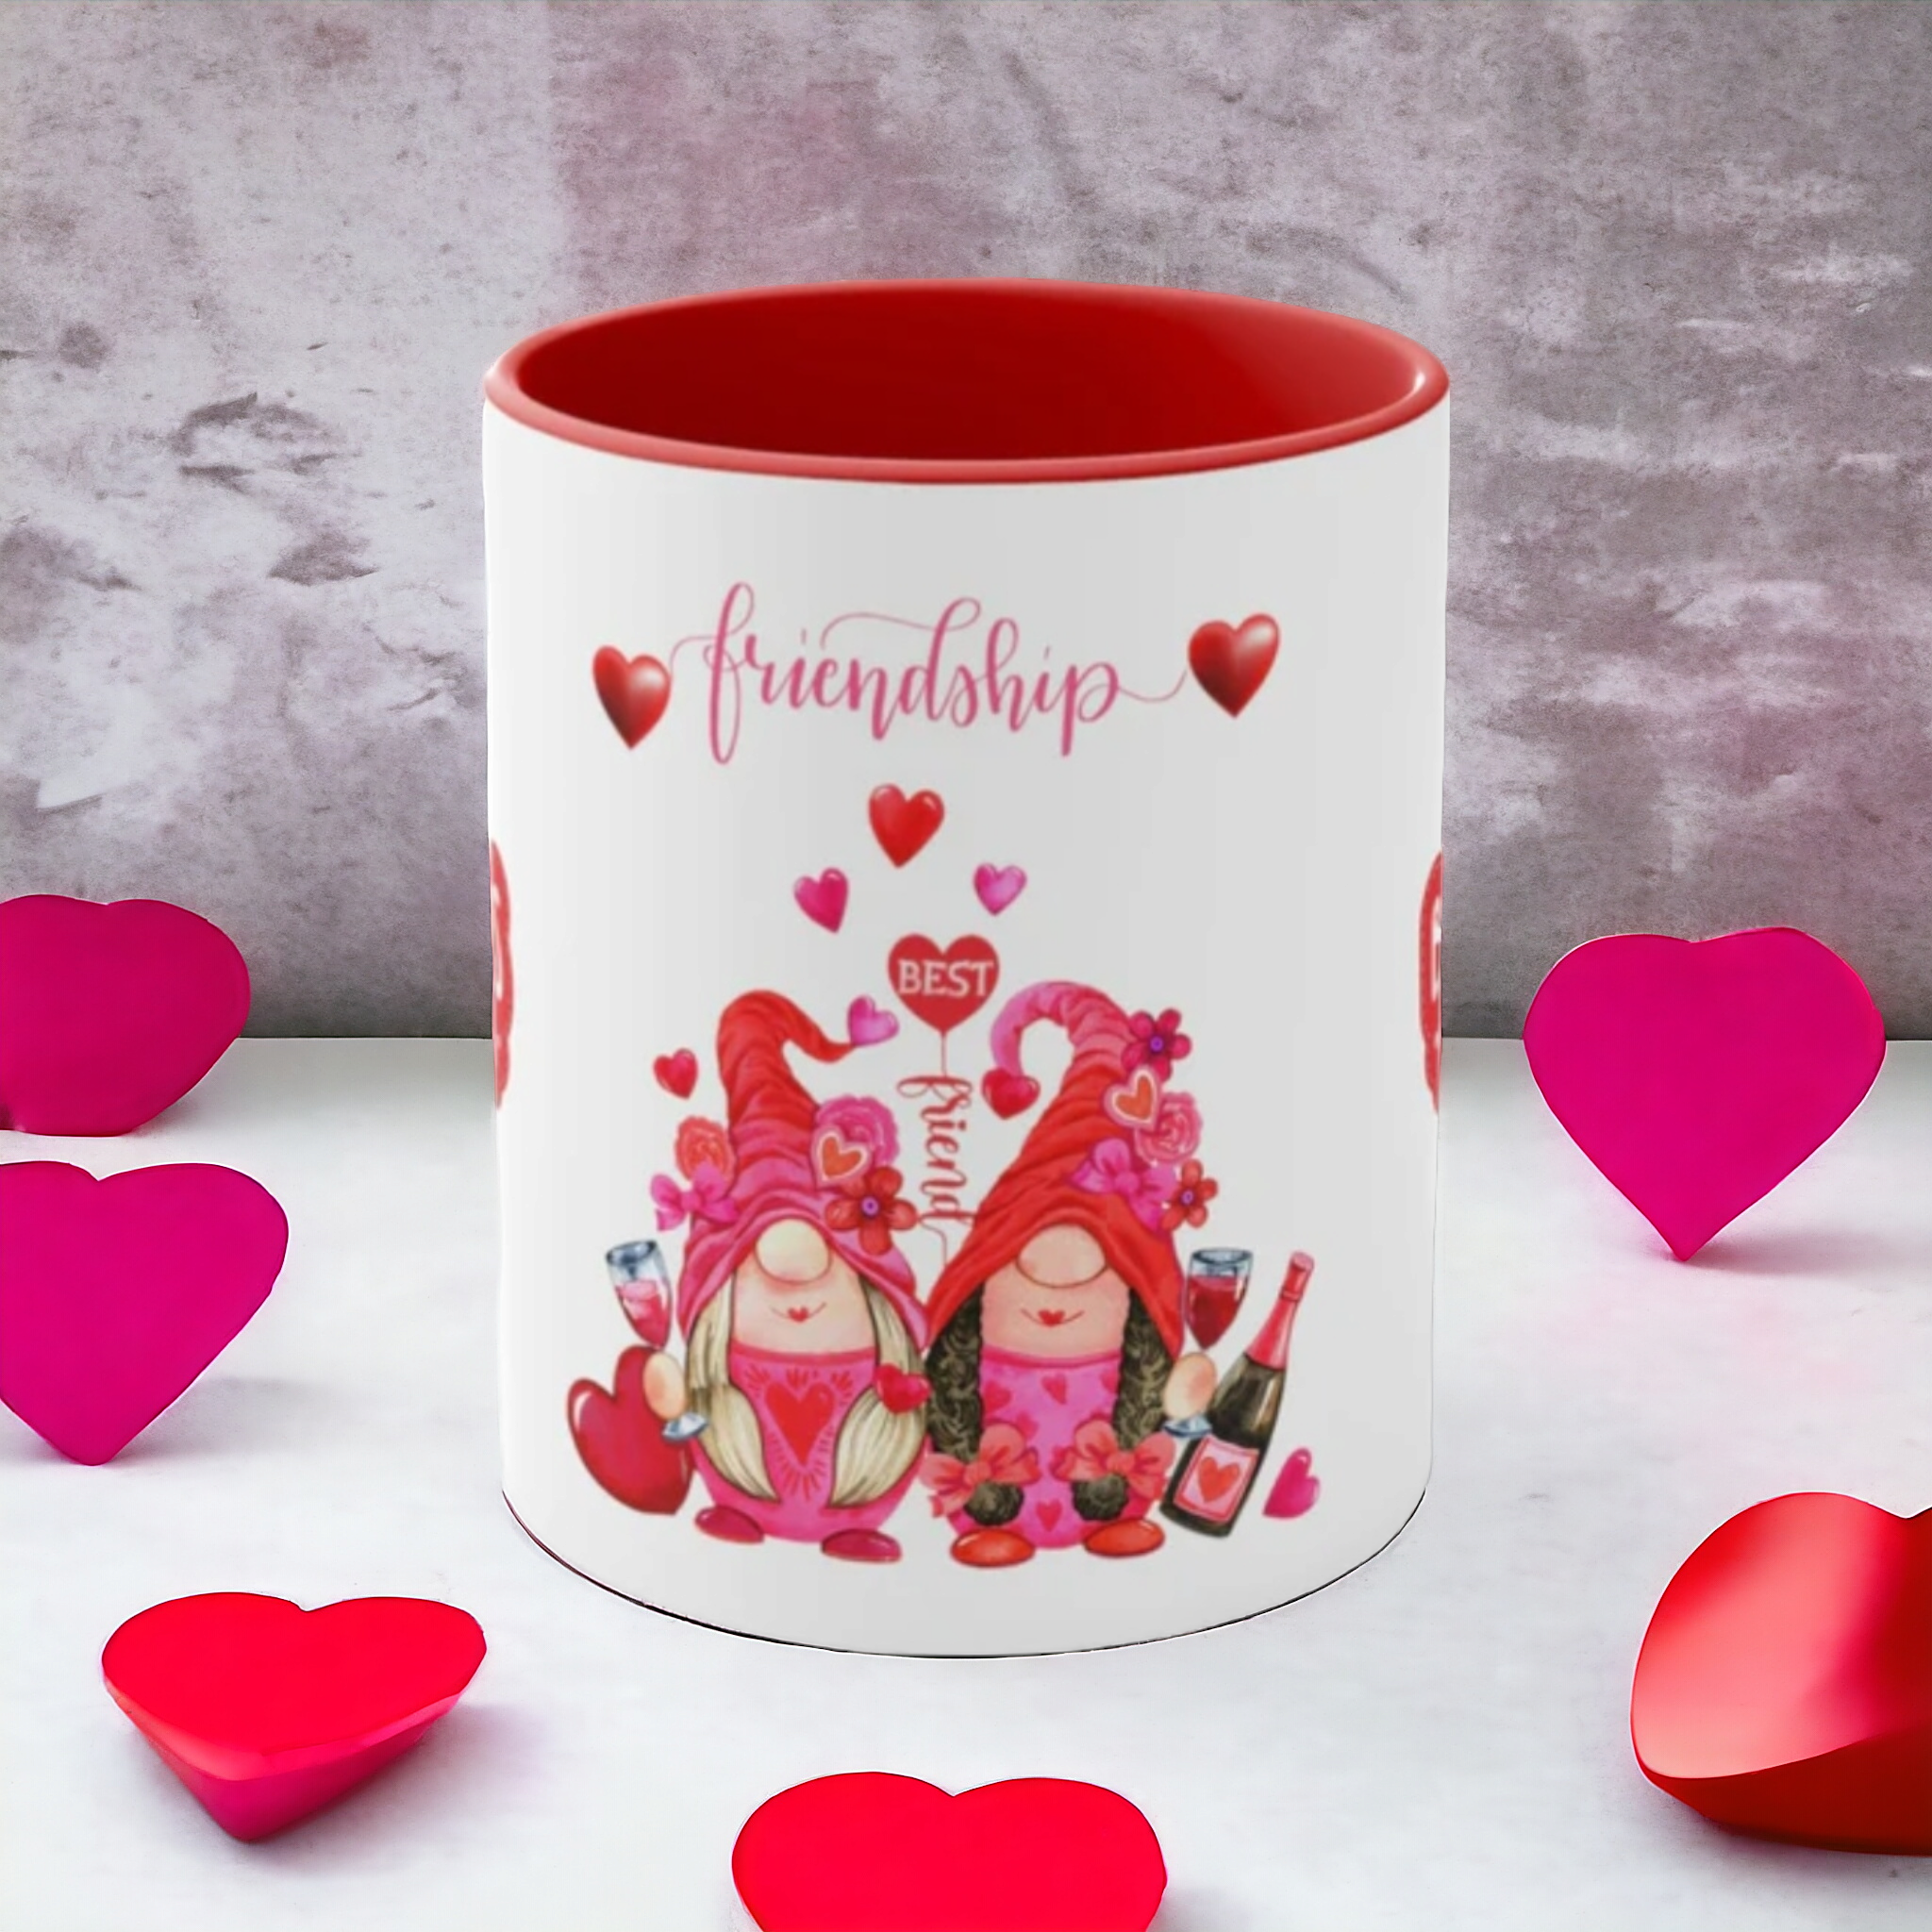 Awesome Valentine's Day Gifts to Give Your Best Friends | J-14